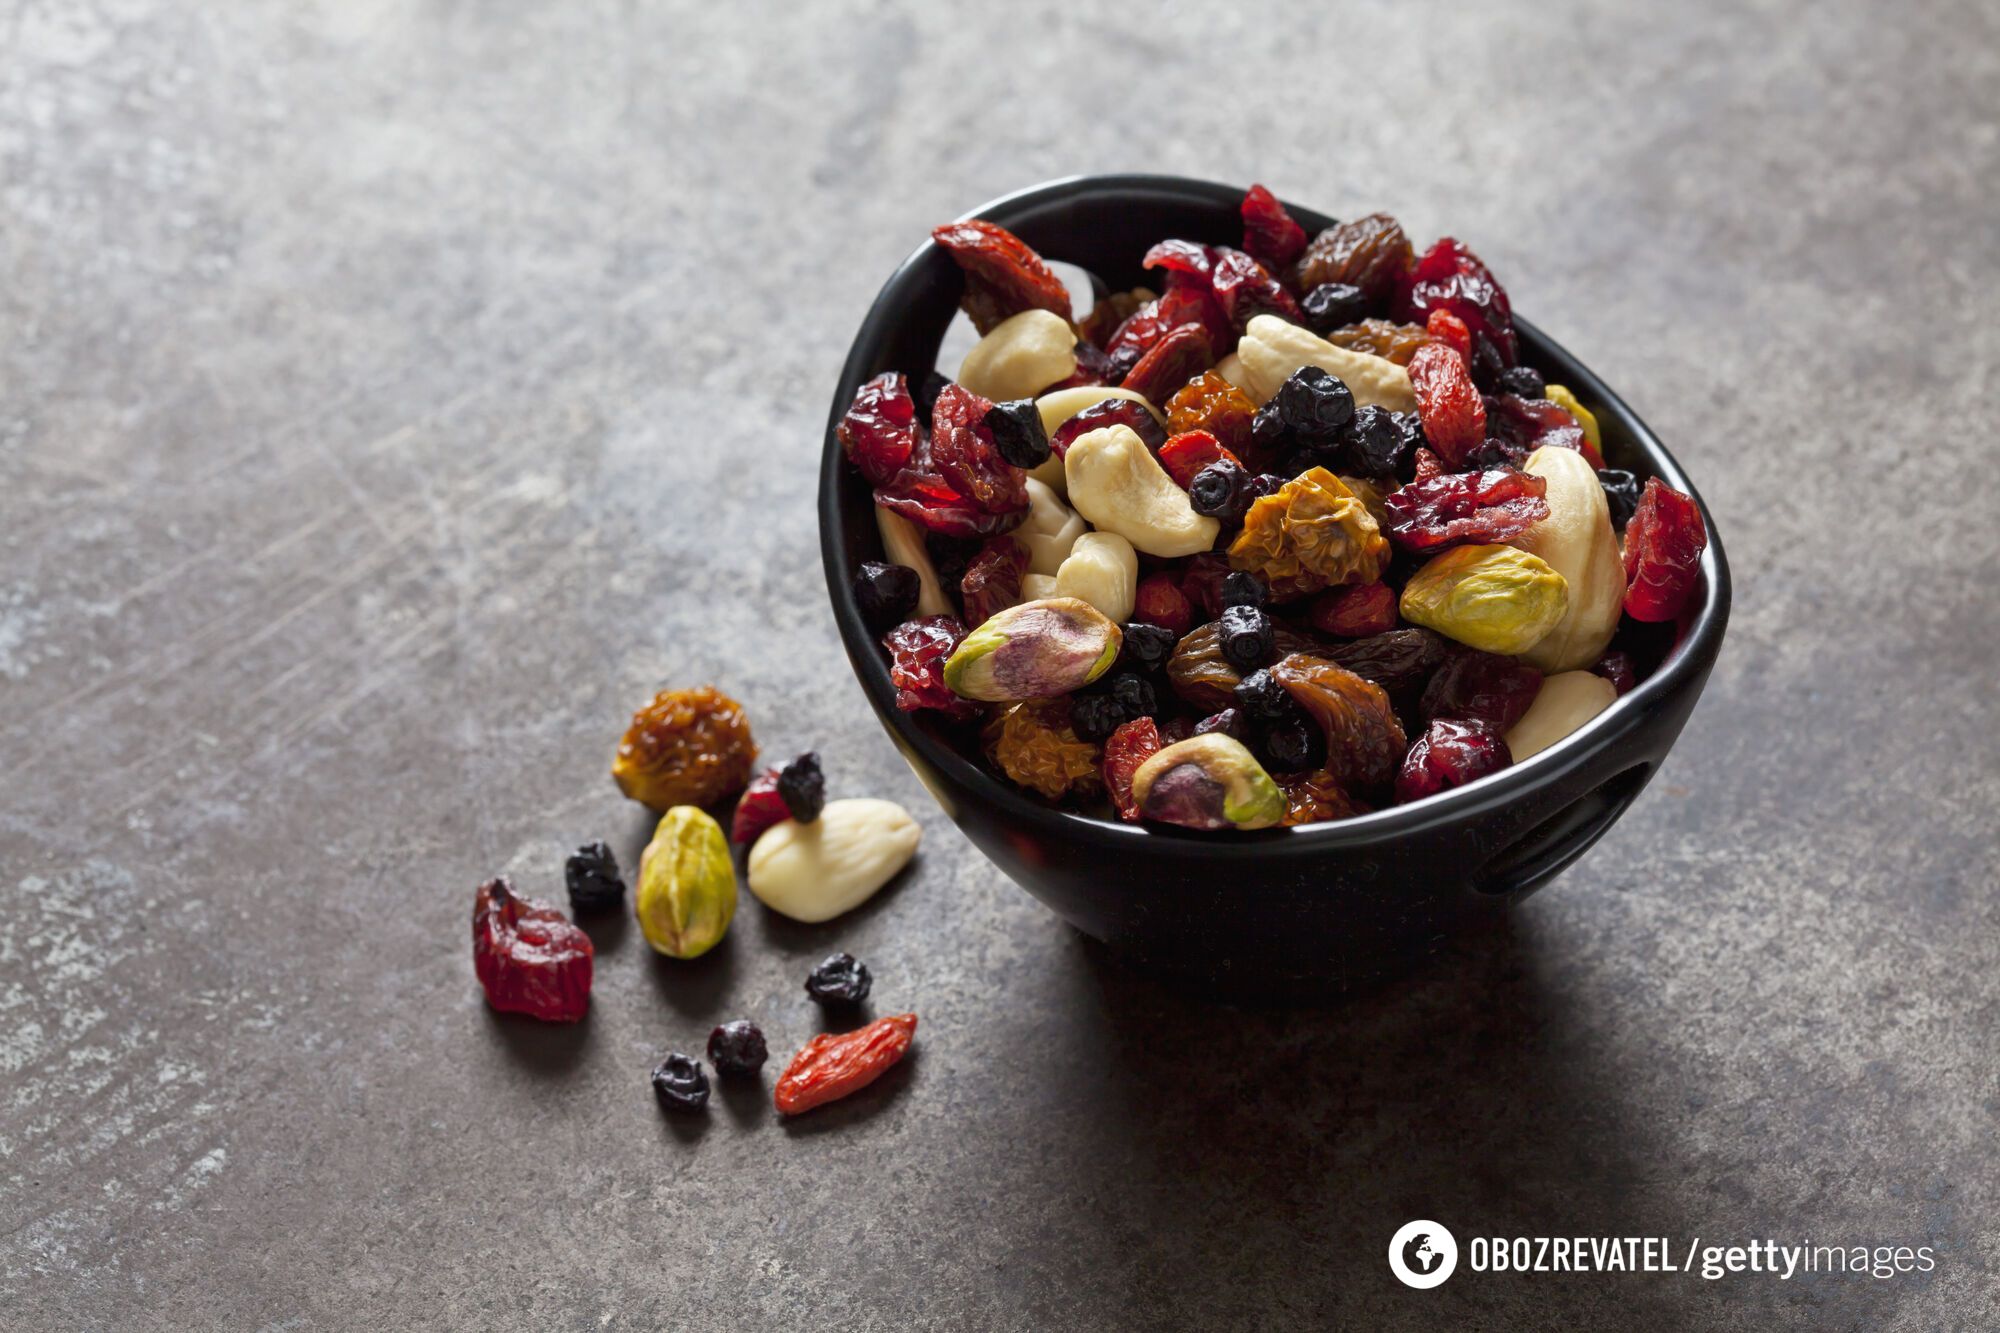 Homemade candied fruits, dried fruits and nuts